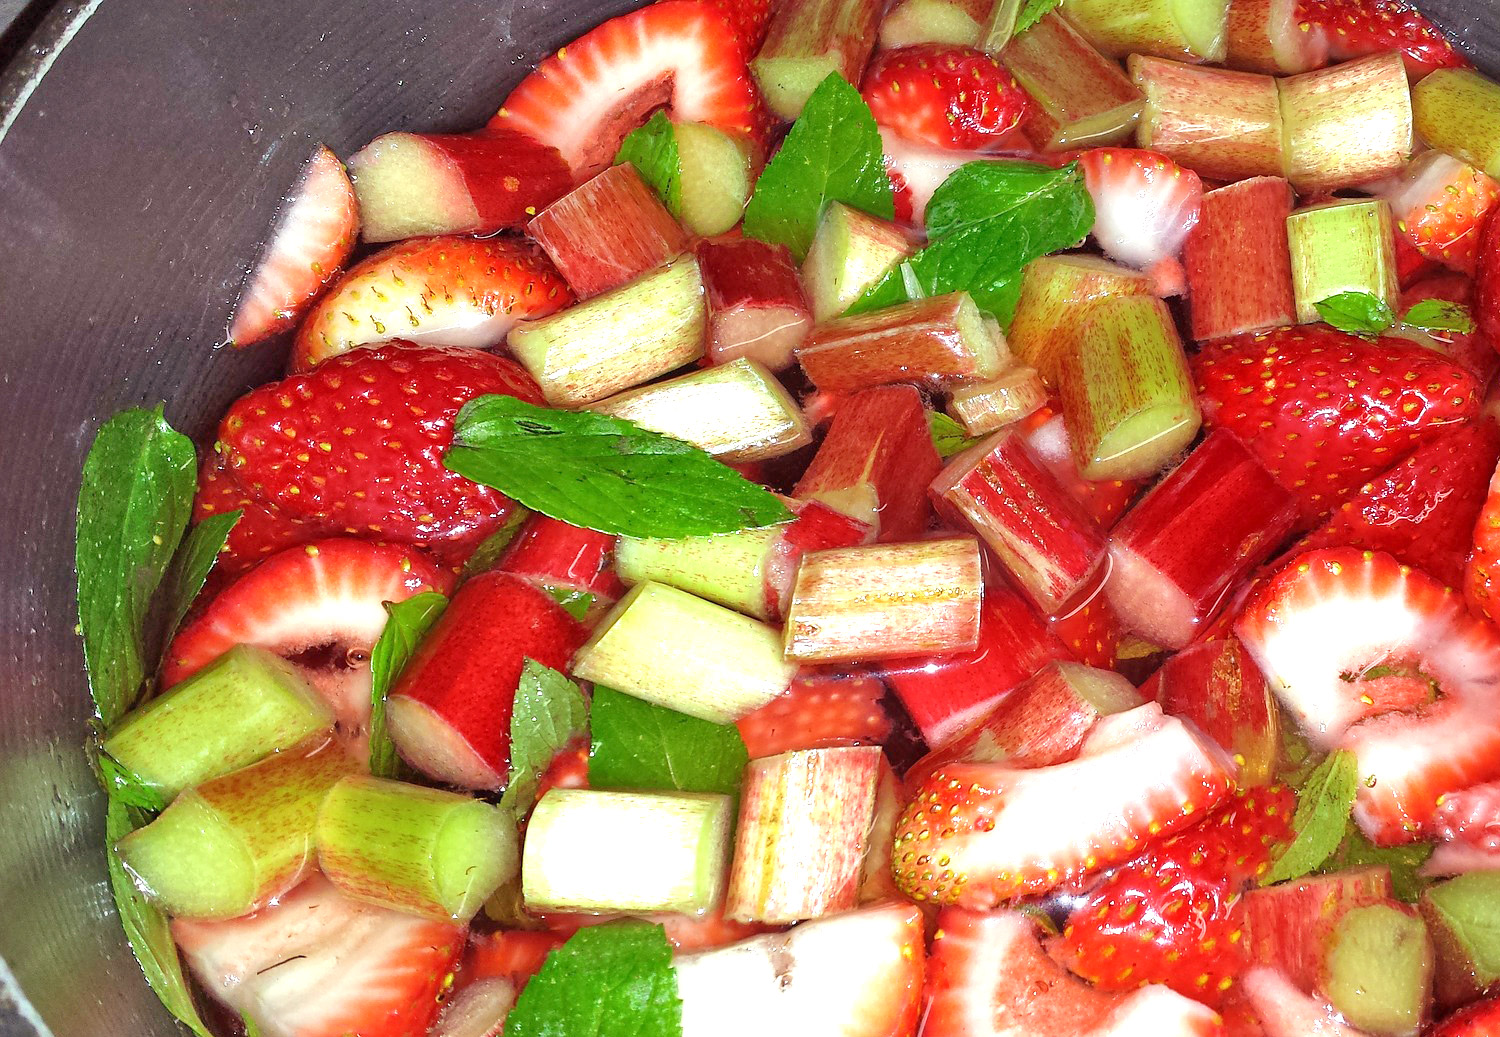 Strawberries and Diced Rhubarb